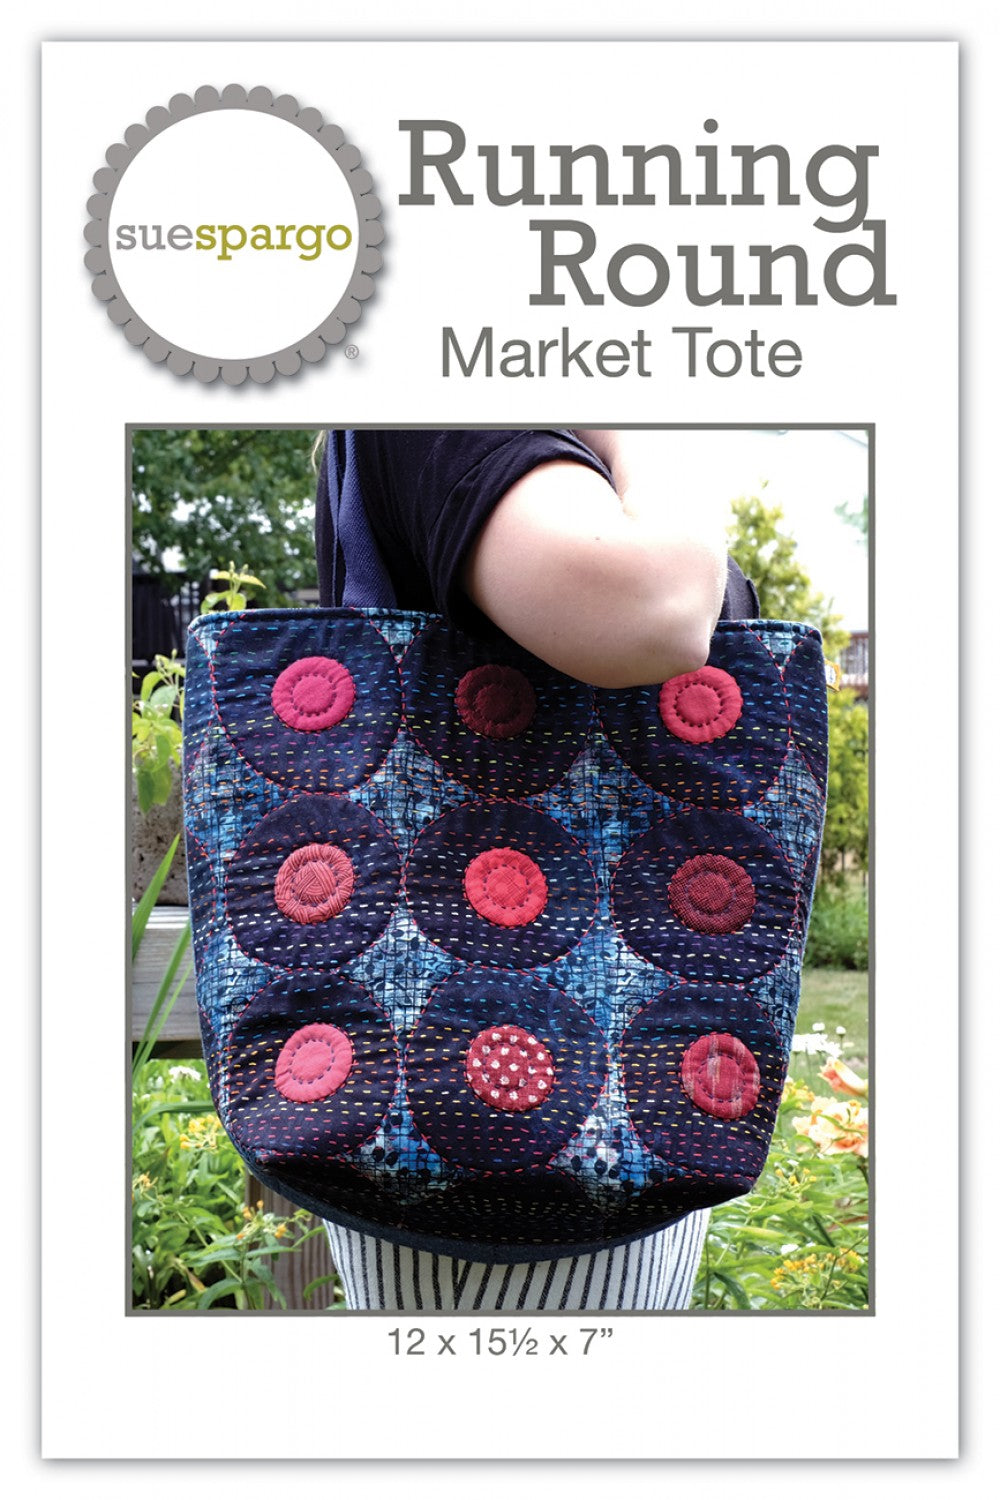 Running Round Market Tote - Applique, Embroidery, and Sewing Pattern by Sue Spargo of Folk Art Quilts